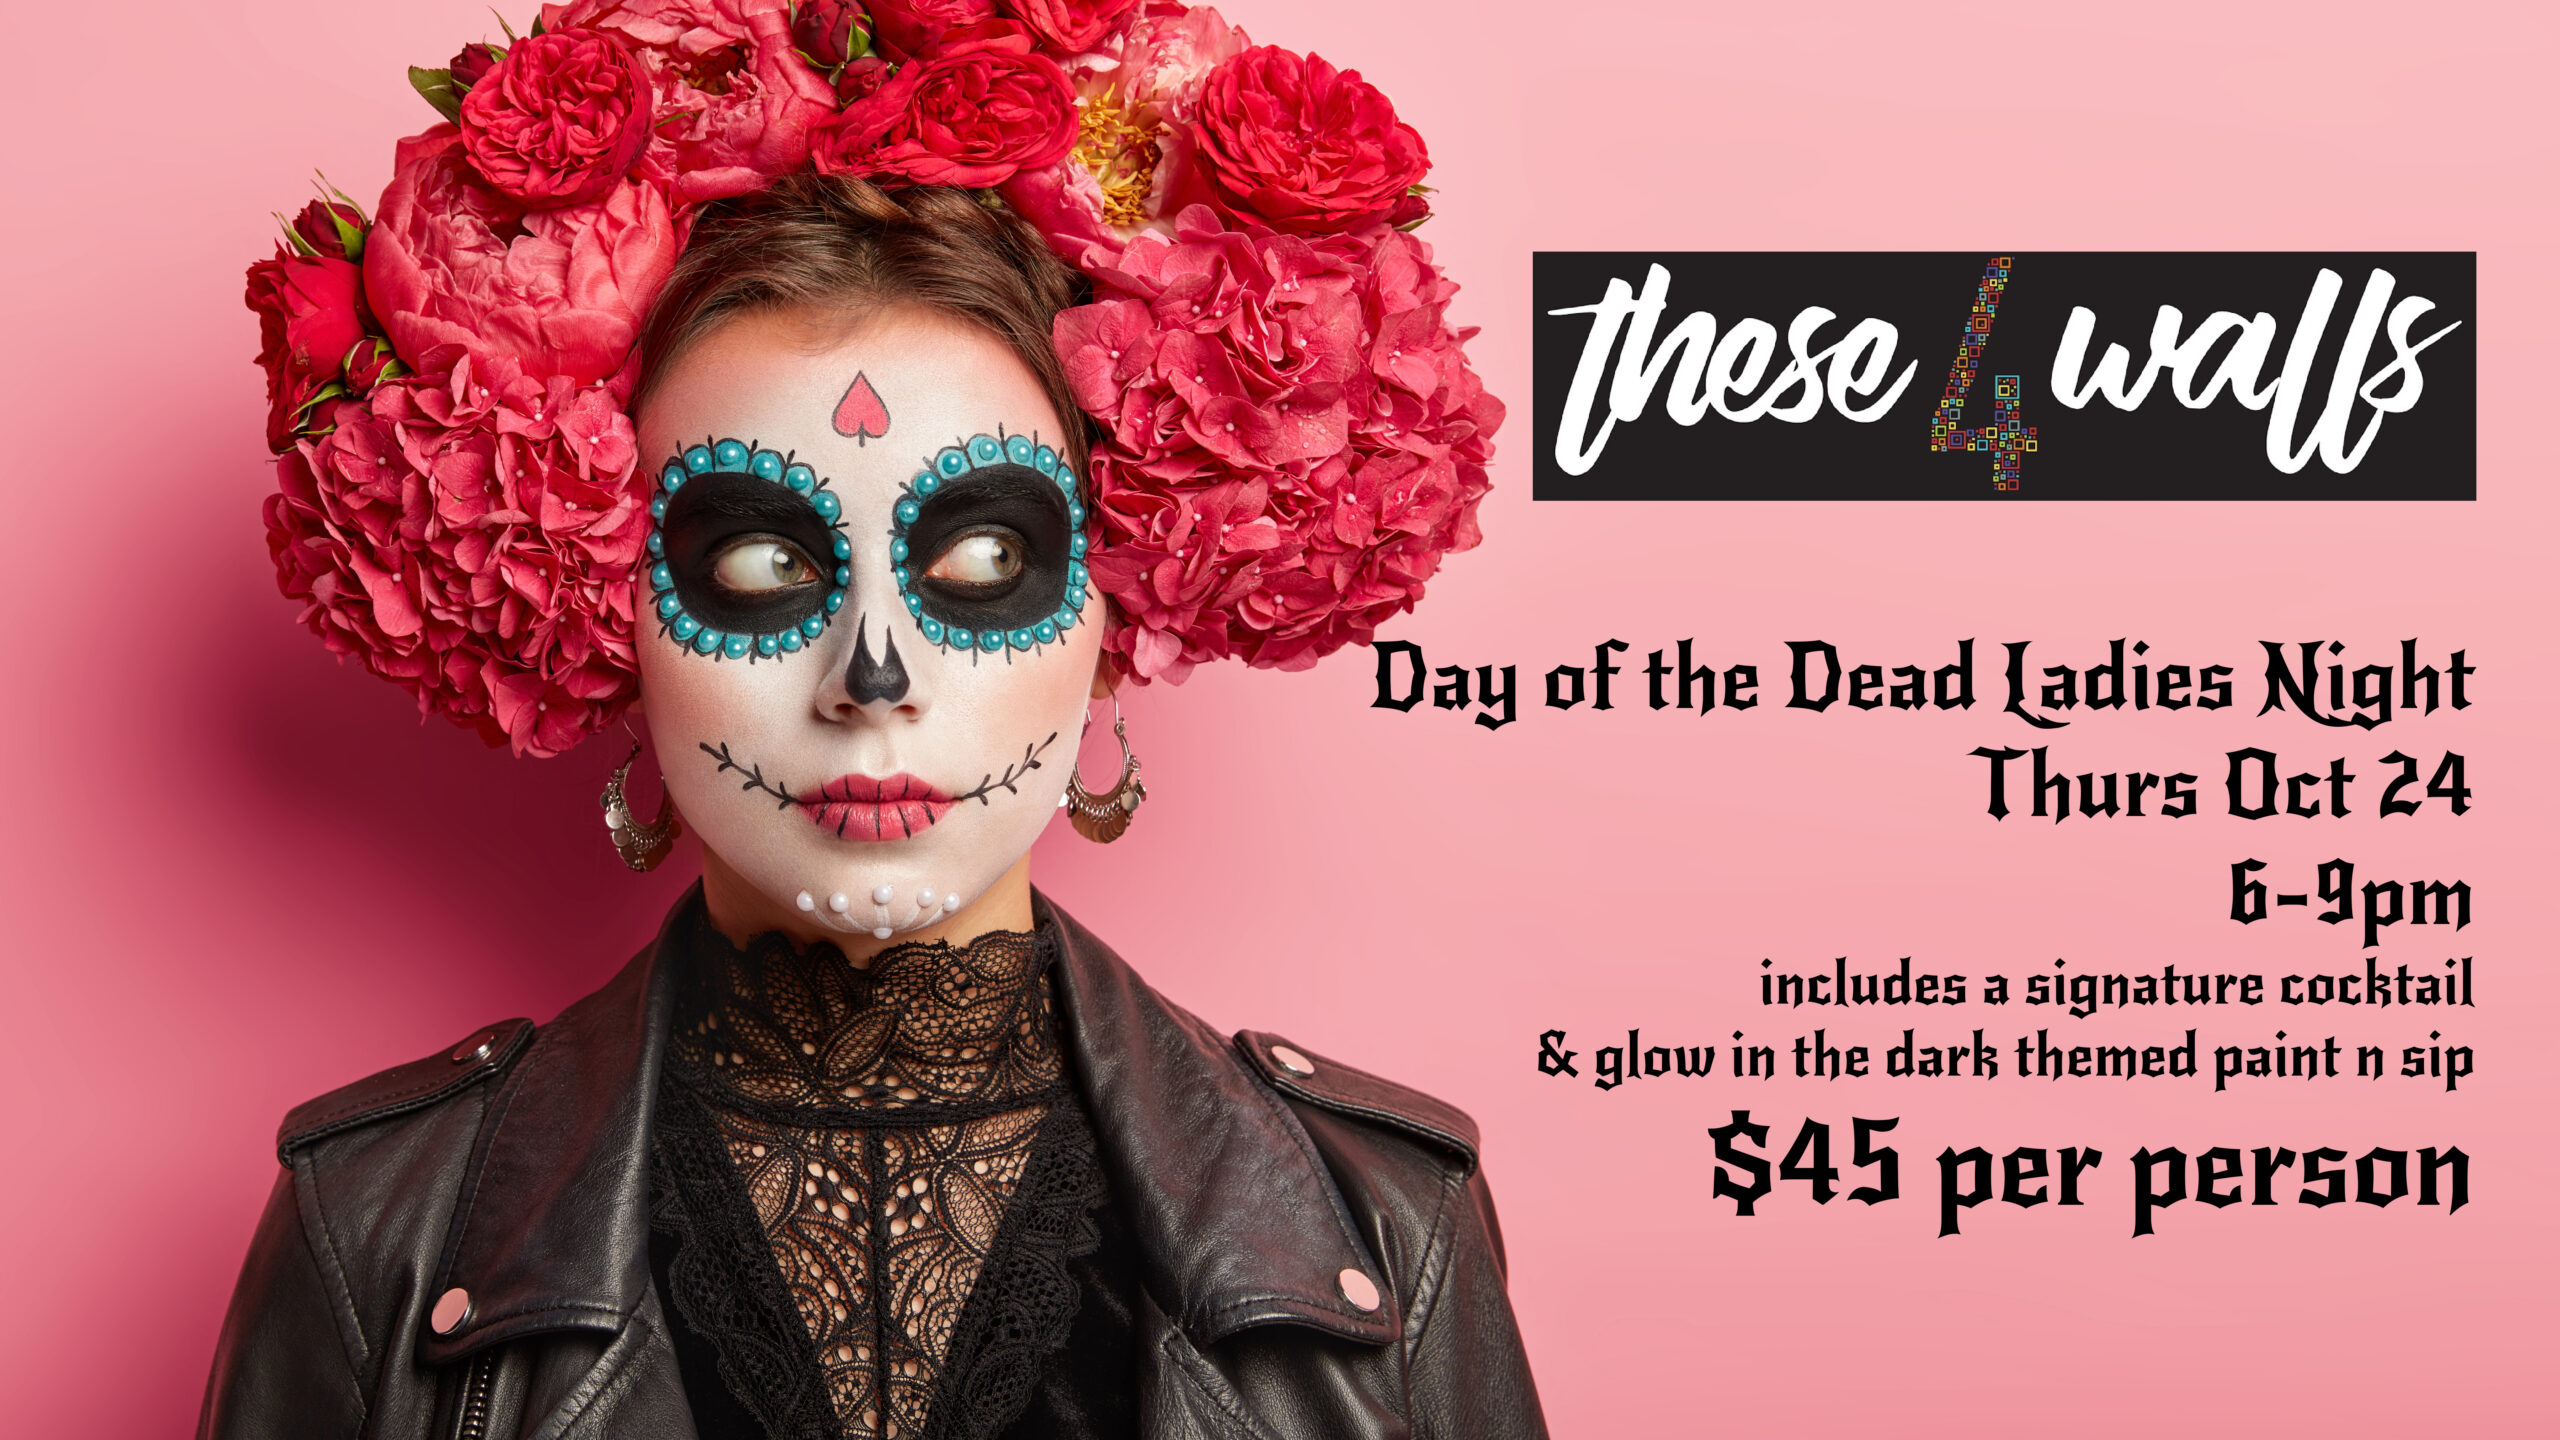 Photo of person wearing Day of the Dead attire and event details.